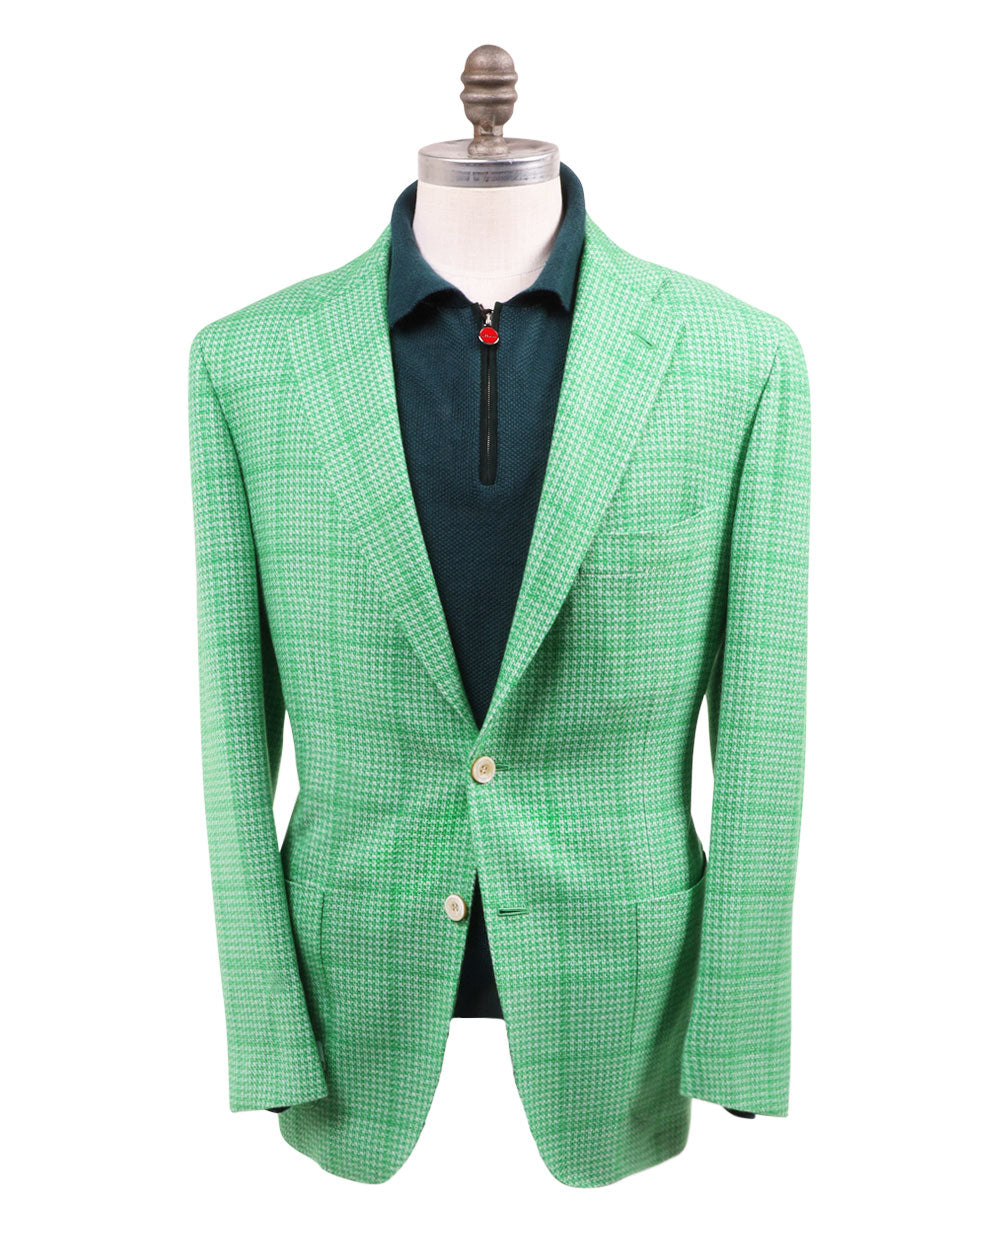 Bright Green and White Sportcoat